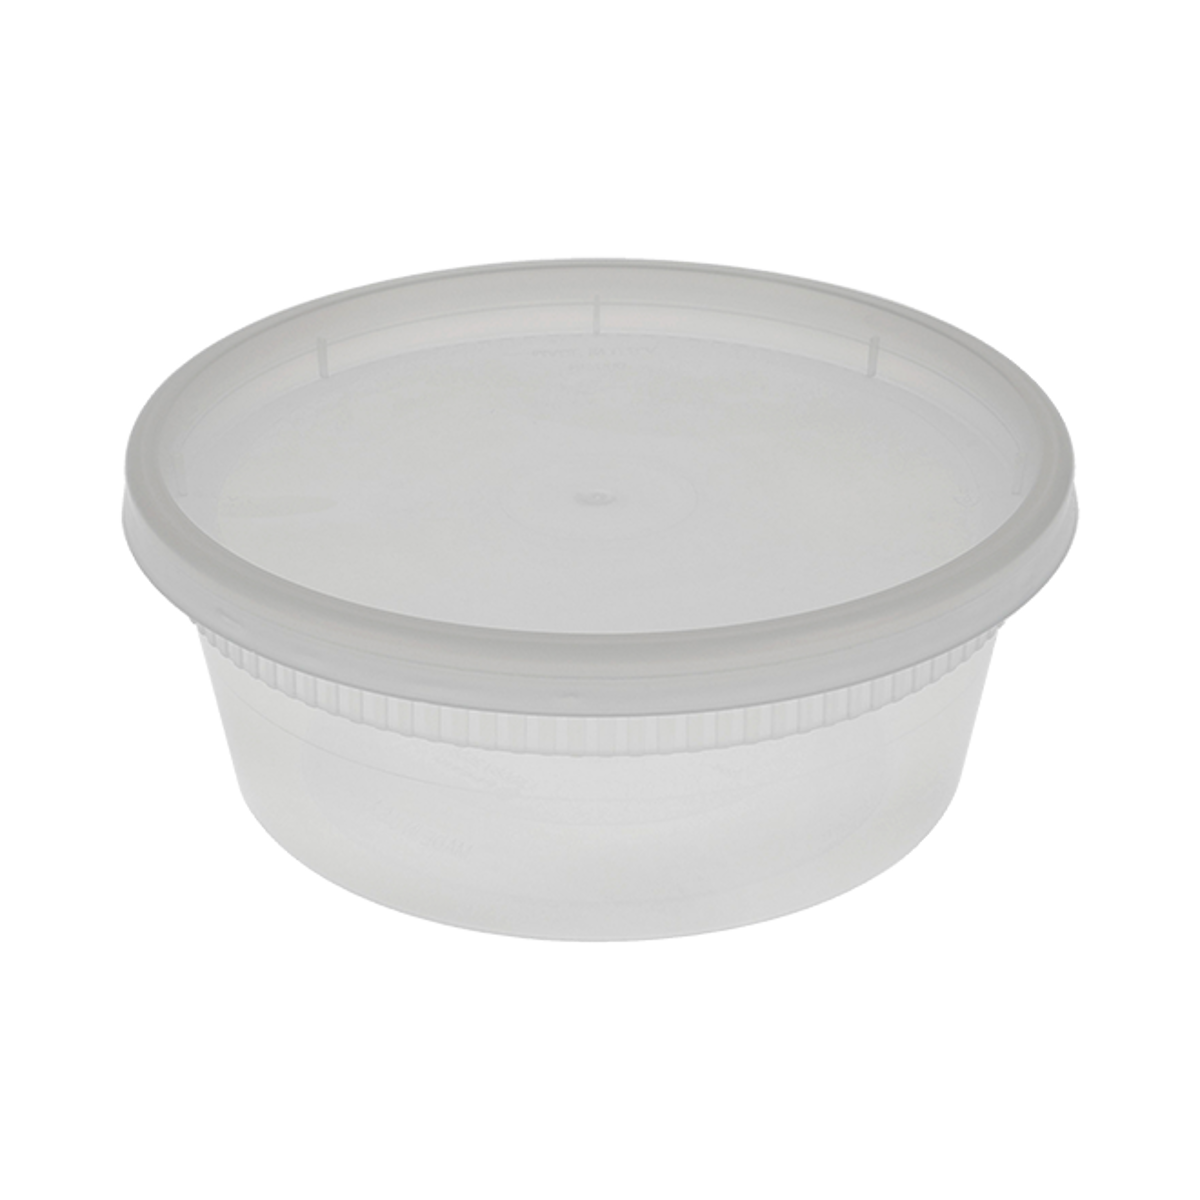 8 oz. Spring/Summer Deli Container with Lid - 250 Pack (260575)